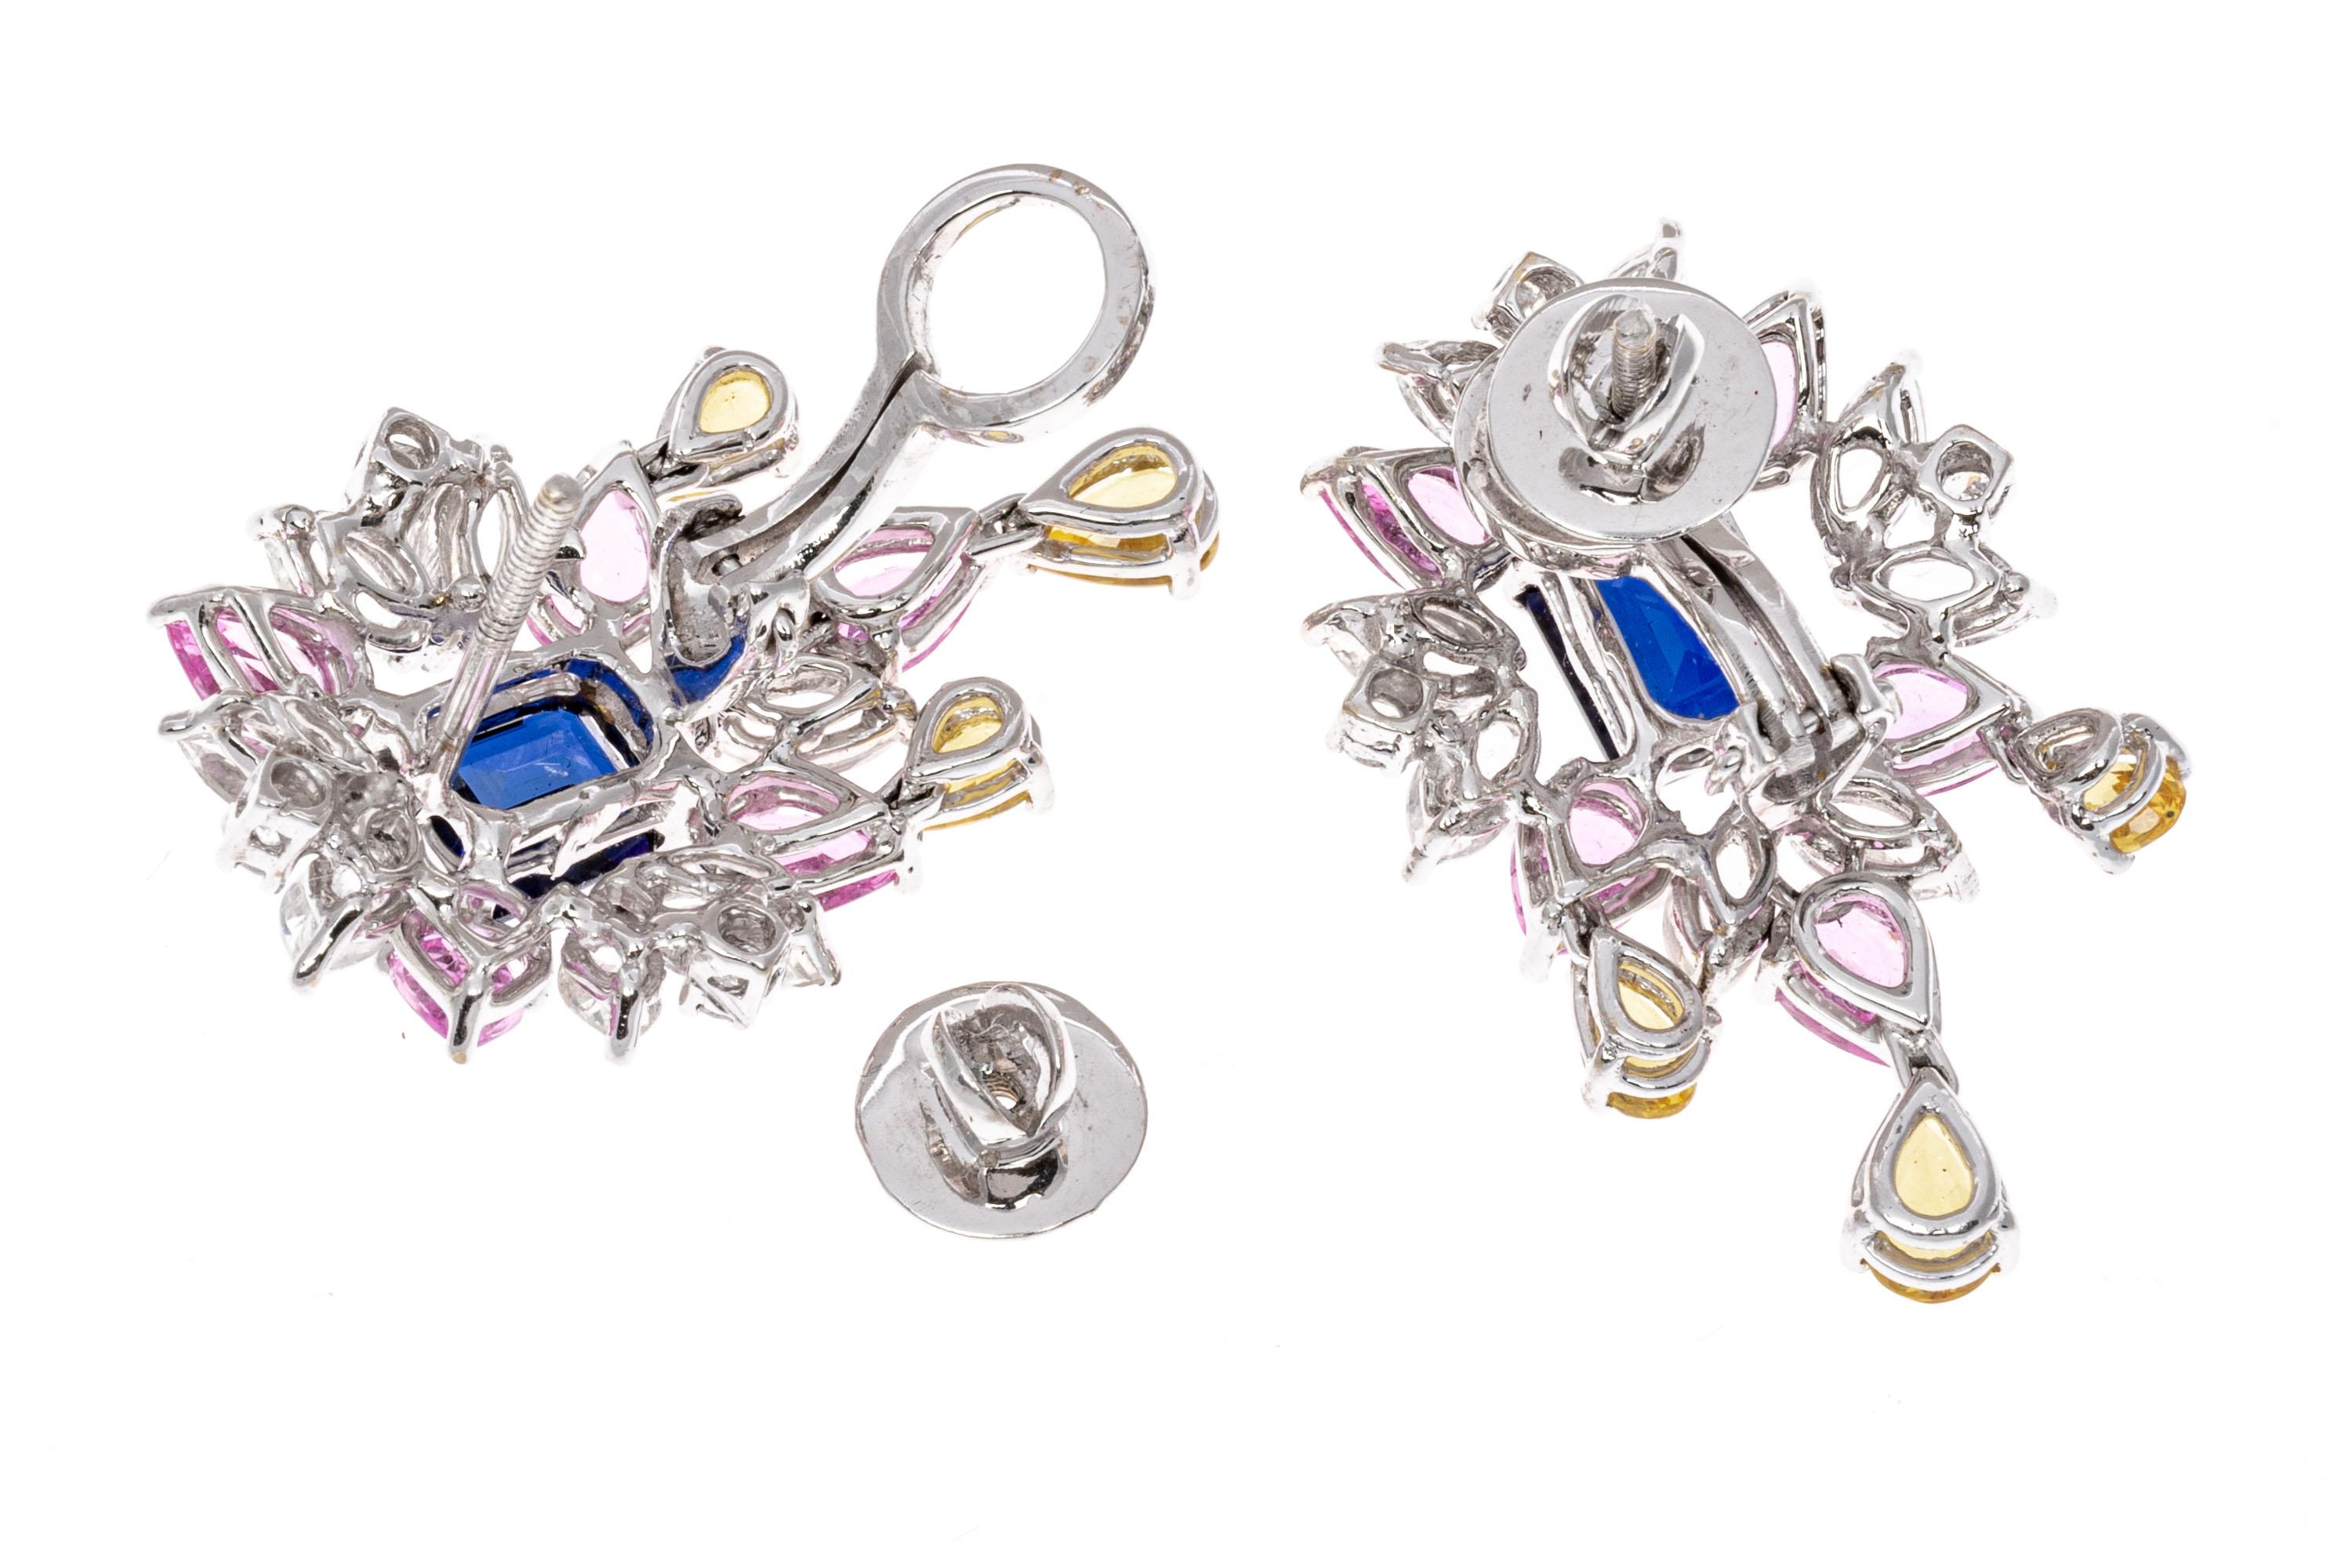 18K White Gold Colorful Blue, Pink, Yellow And White Sapphire Cluster Earrings. These amazingly colorful earrings are a cluster style, with a center emerald cut deep navy blue synthetic sapphire center stone. Surrounding the center are a cluster of